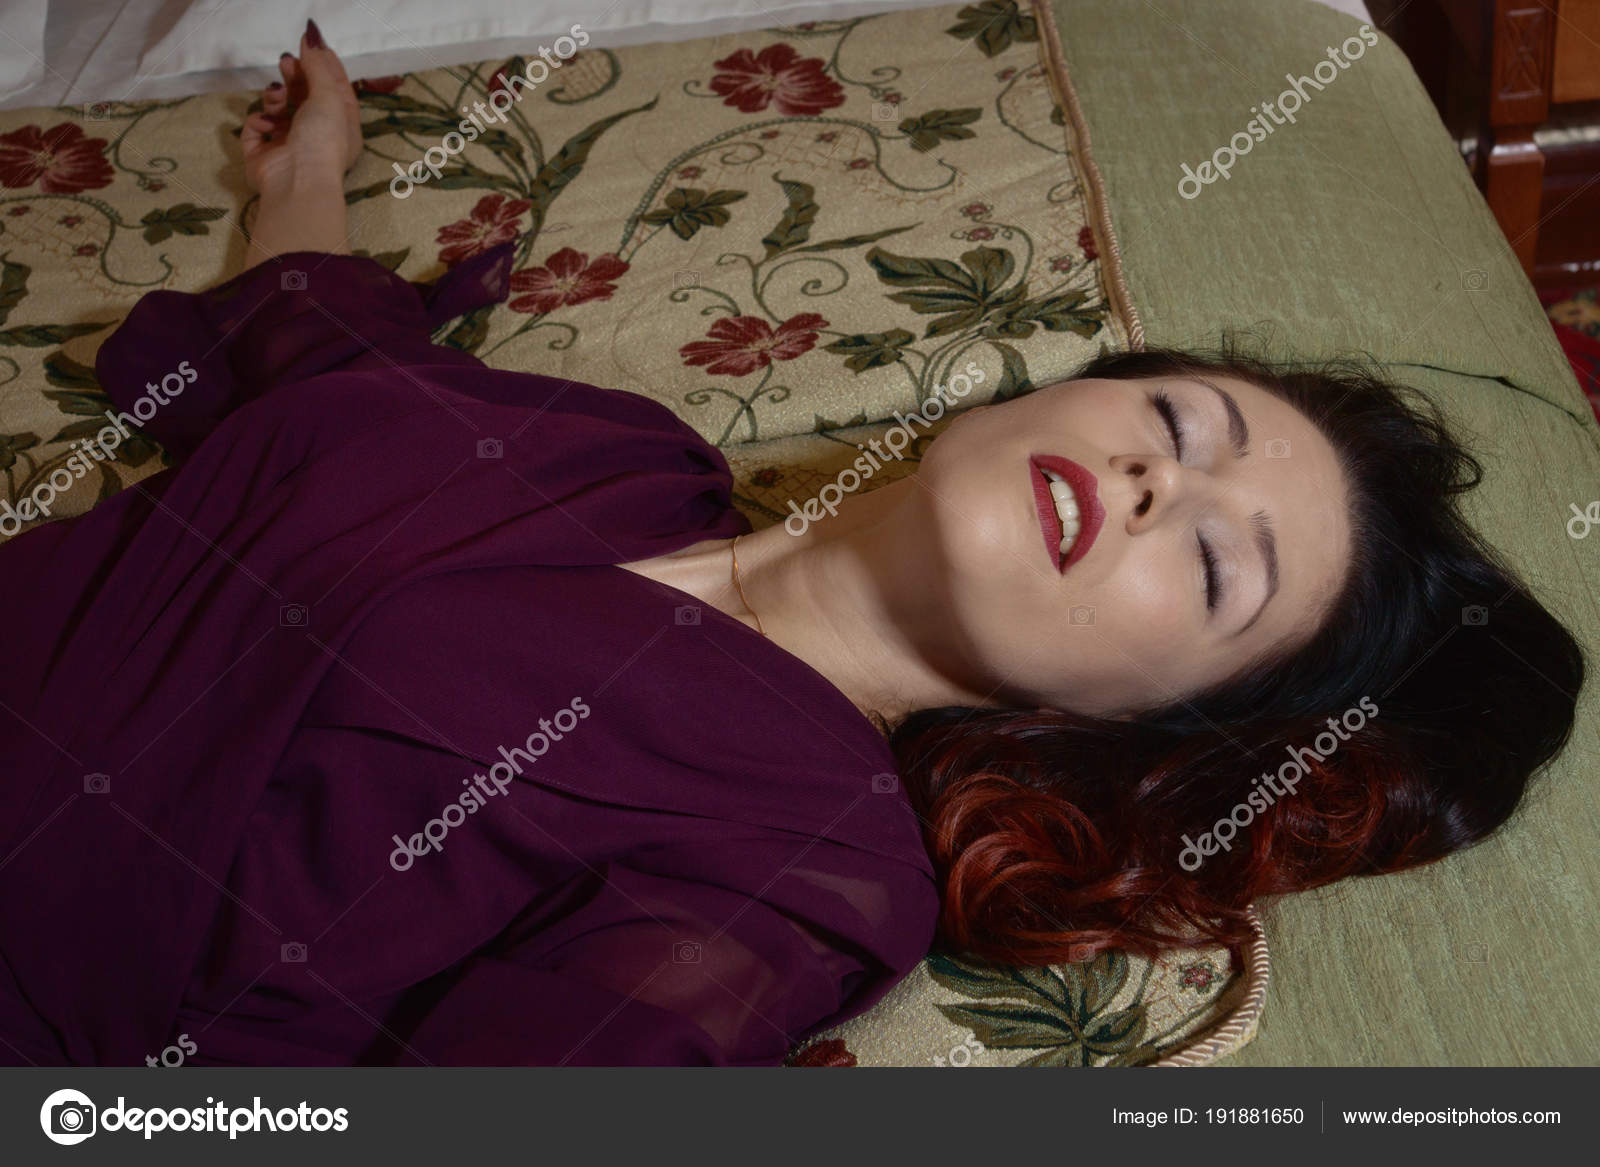 Sexual woman being strangled Stock Photo by © Demian 1918816